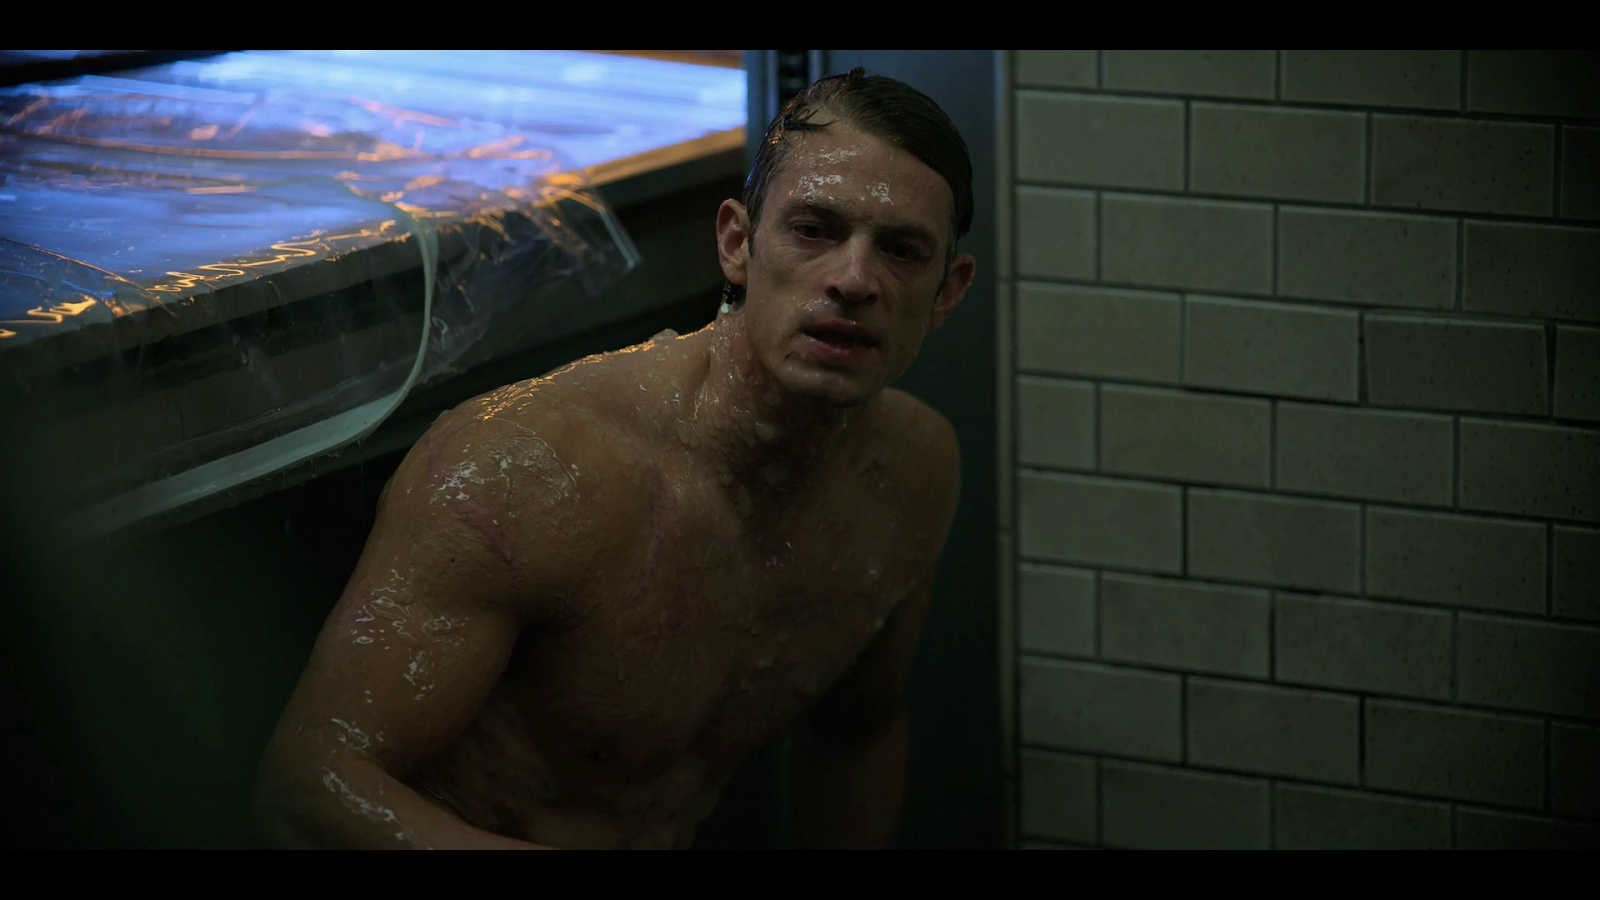 Joel Kinnaman nude in Altered Carbon 1-01 "Out Of The Past" .